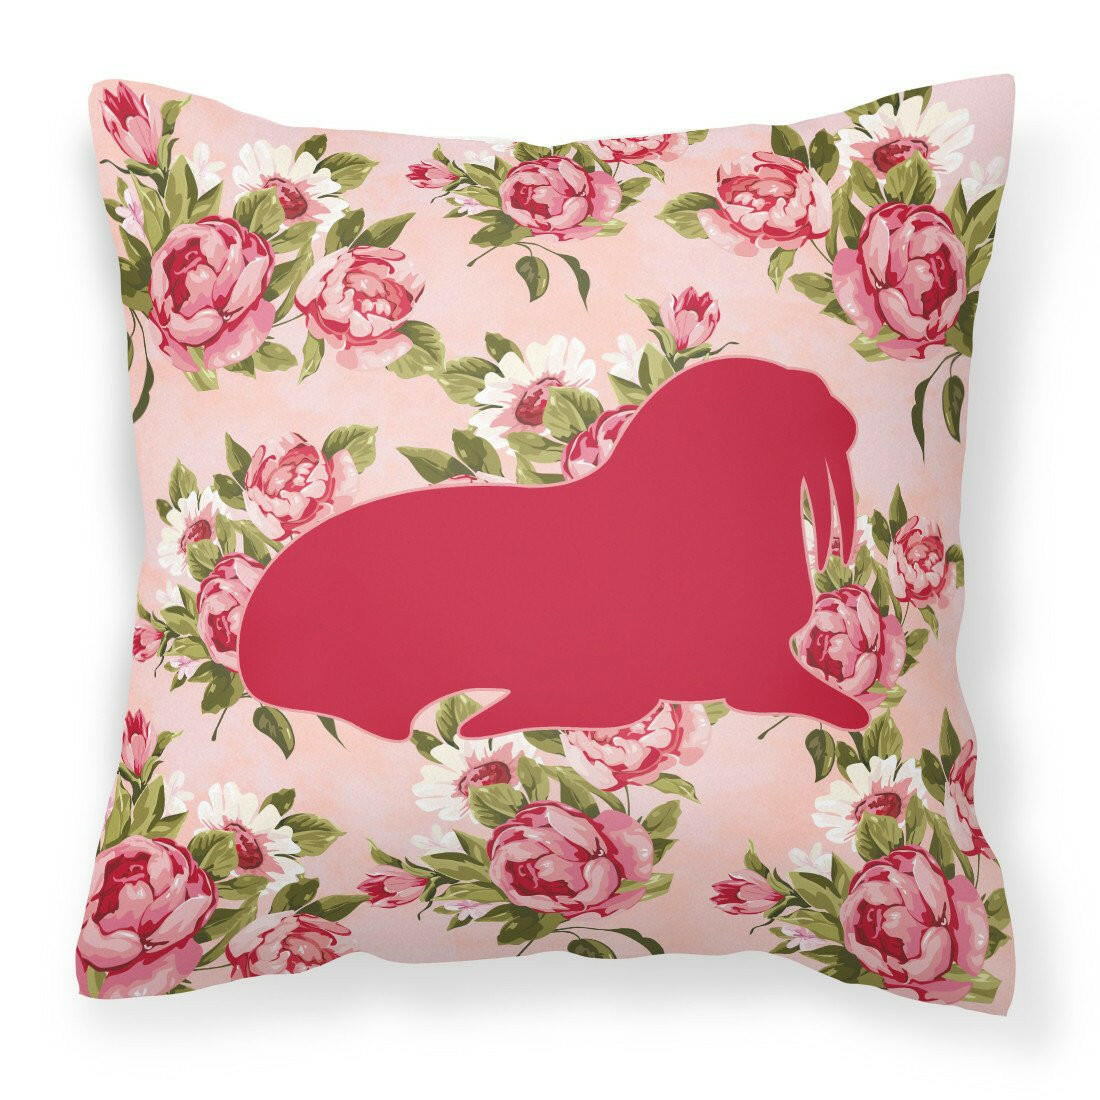 Walrus Shabby Chic Pink Roses  Fabric Decorative Pillow BB1017-RS-PK-PW1414 - the-store.com